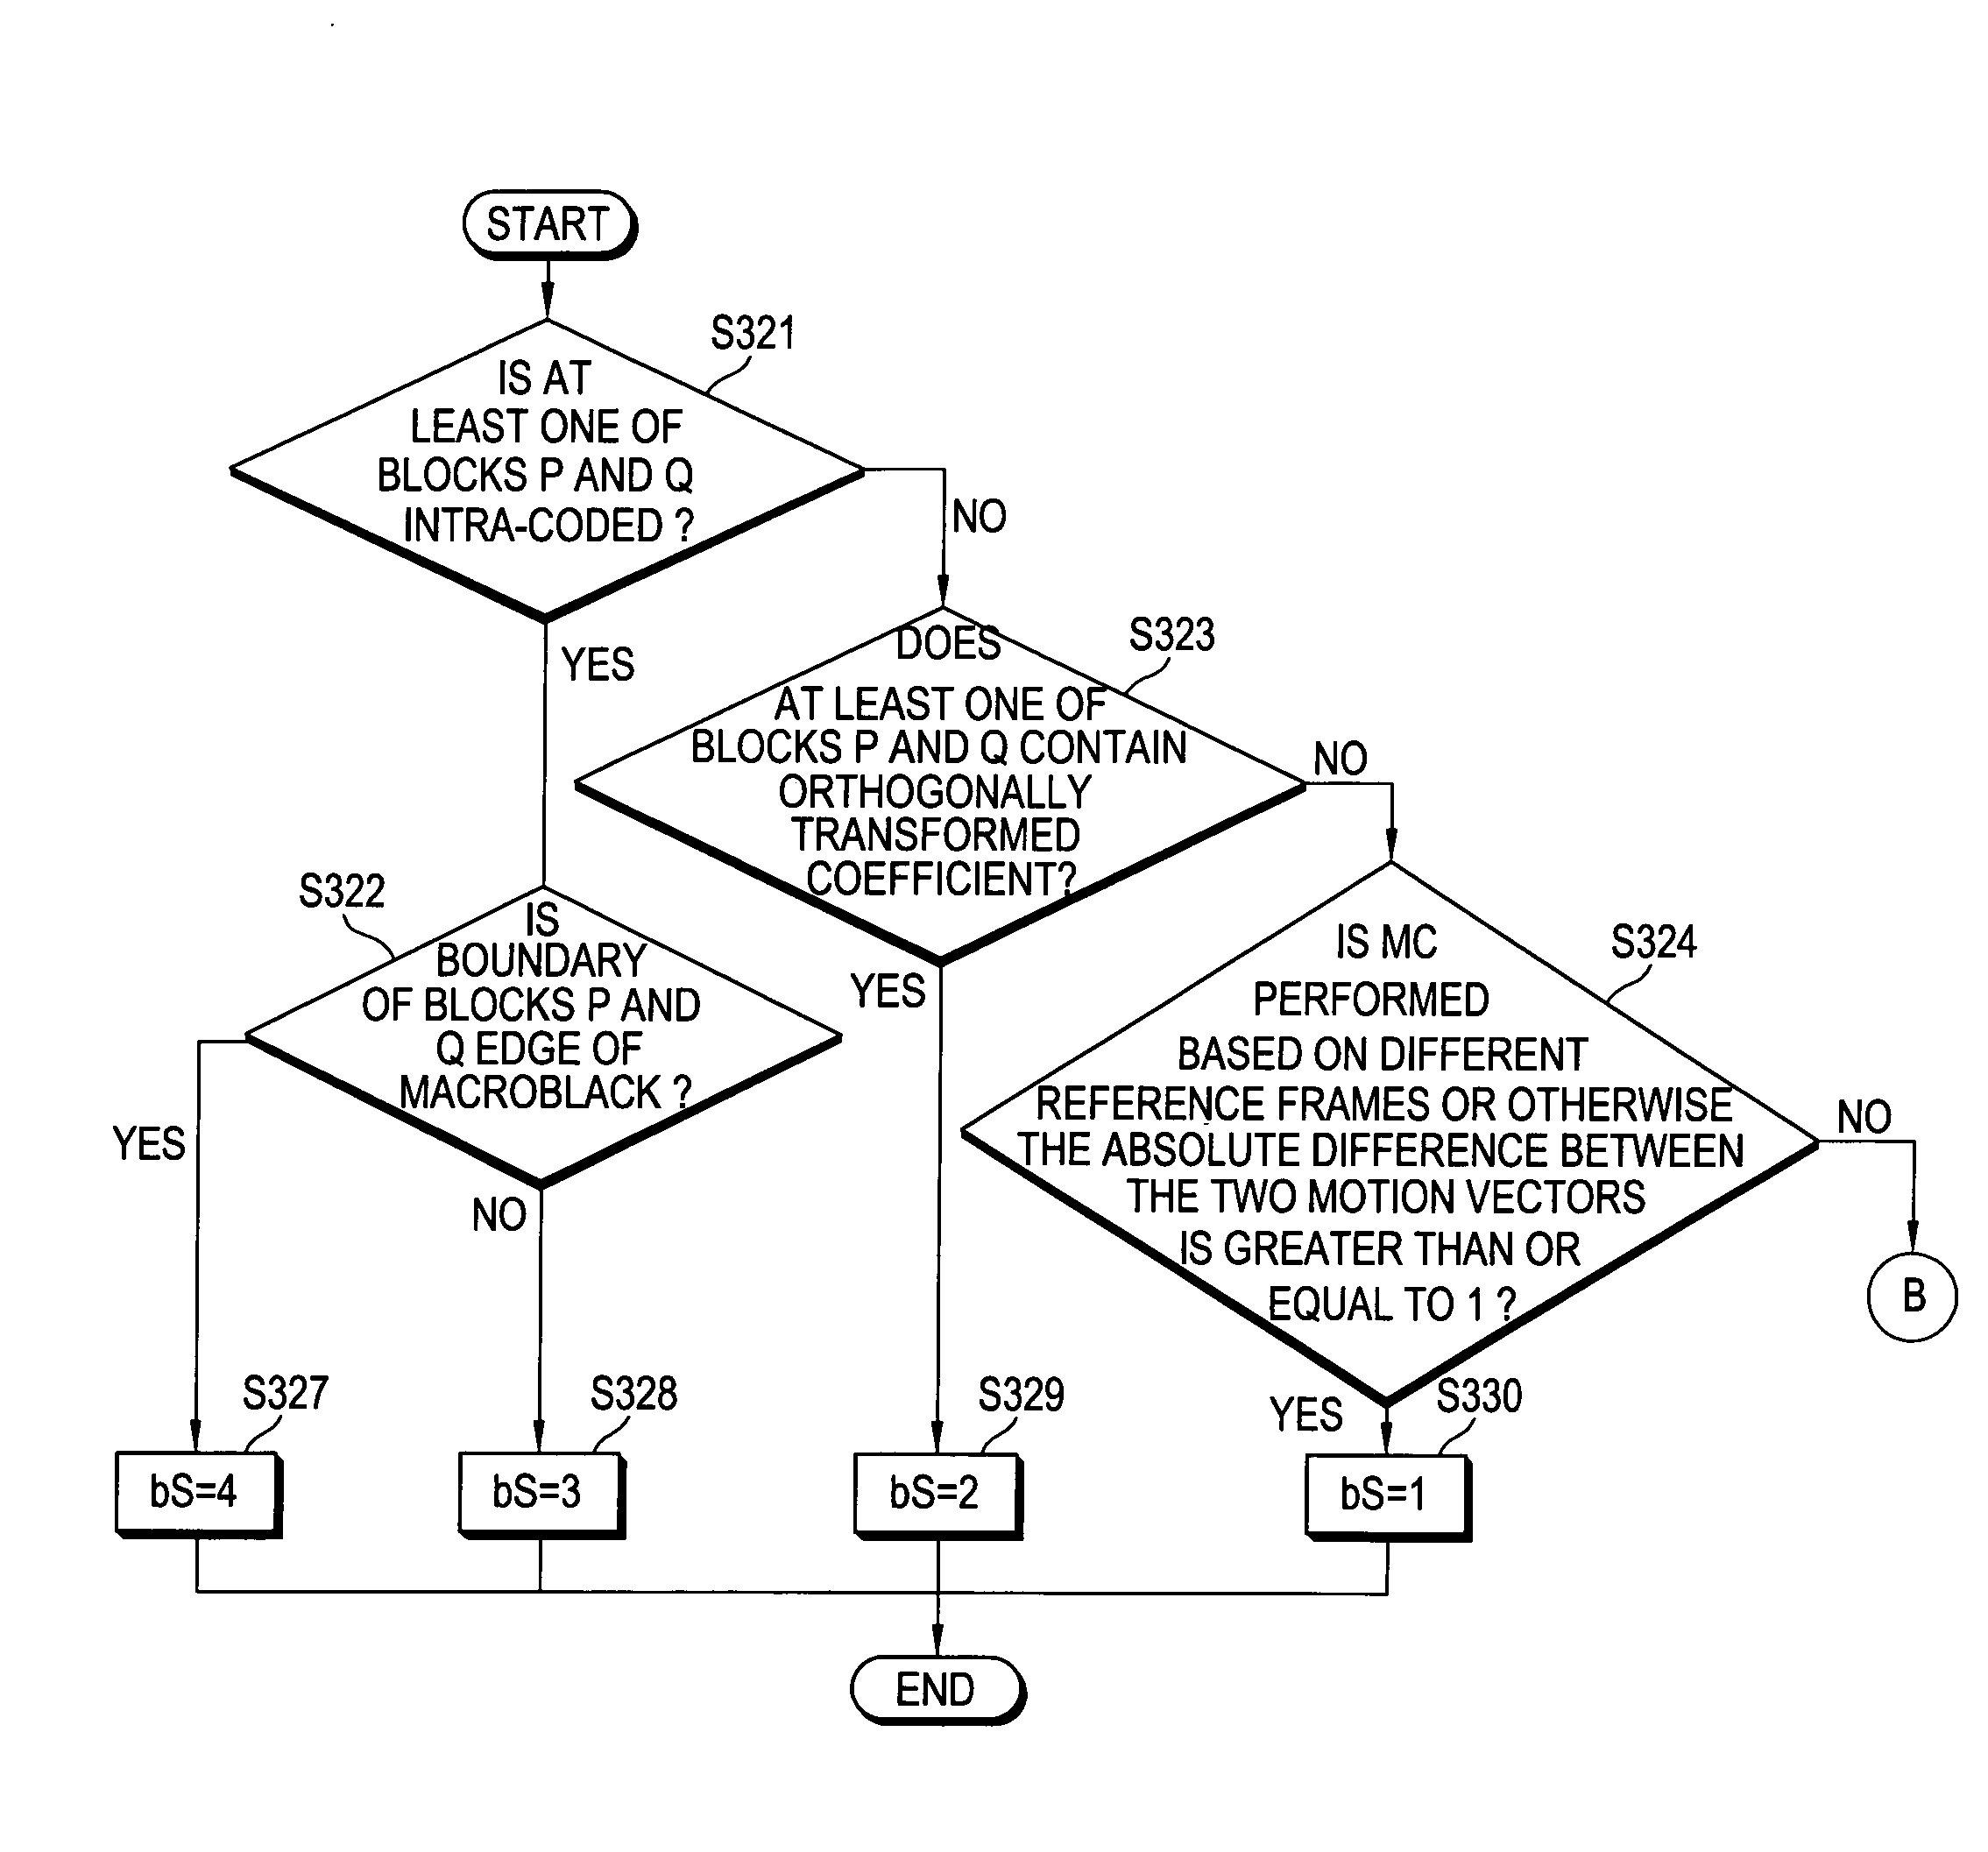 Derivation process of boundary filtering strength, and deblocking filtering method and apparatus using the derivation process